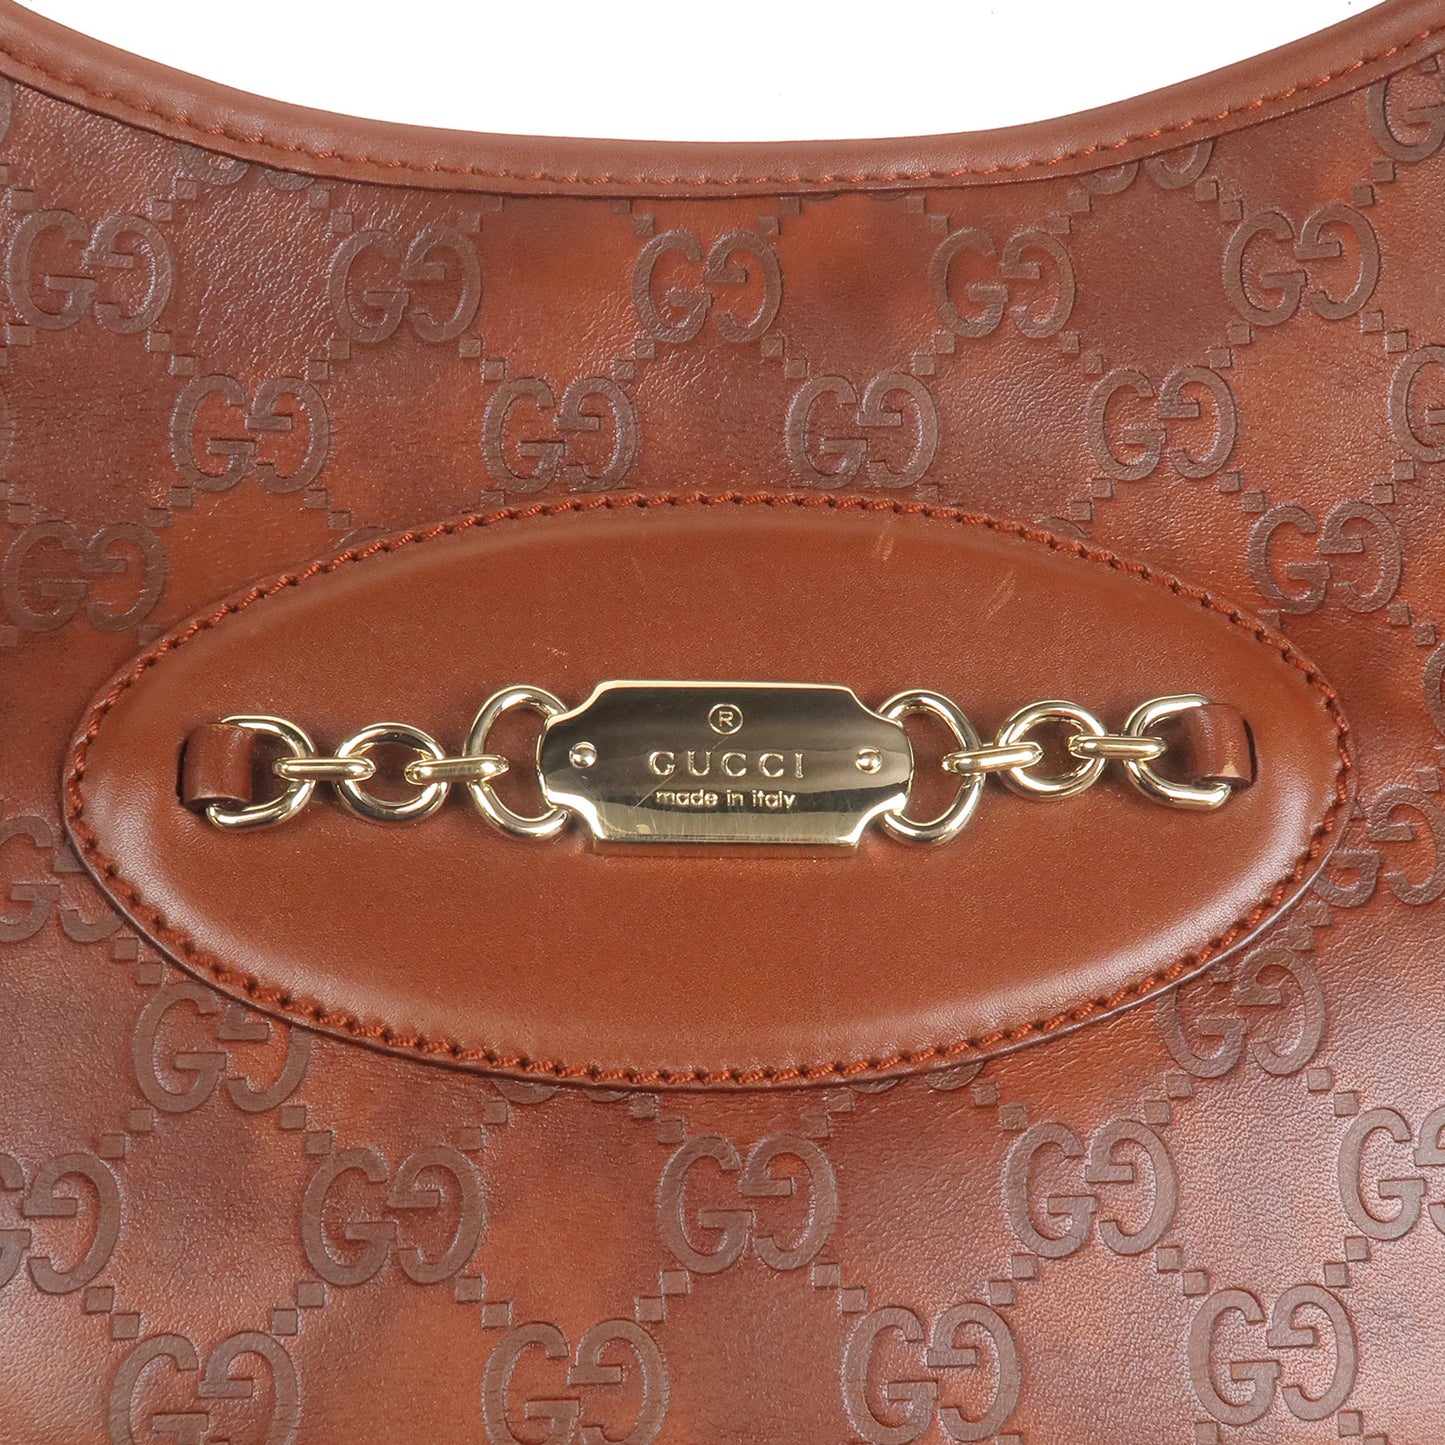 GUCCI Guccissima Leather Shoulder Bag 145778 Brown G4285 Authentic